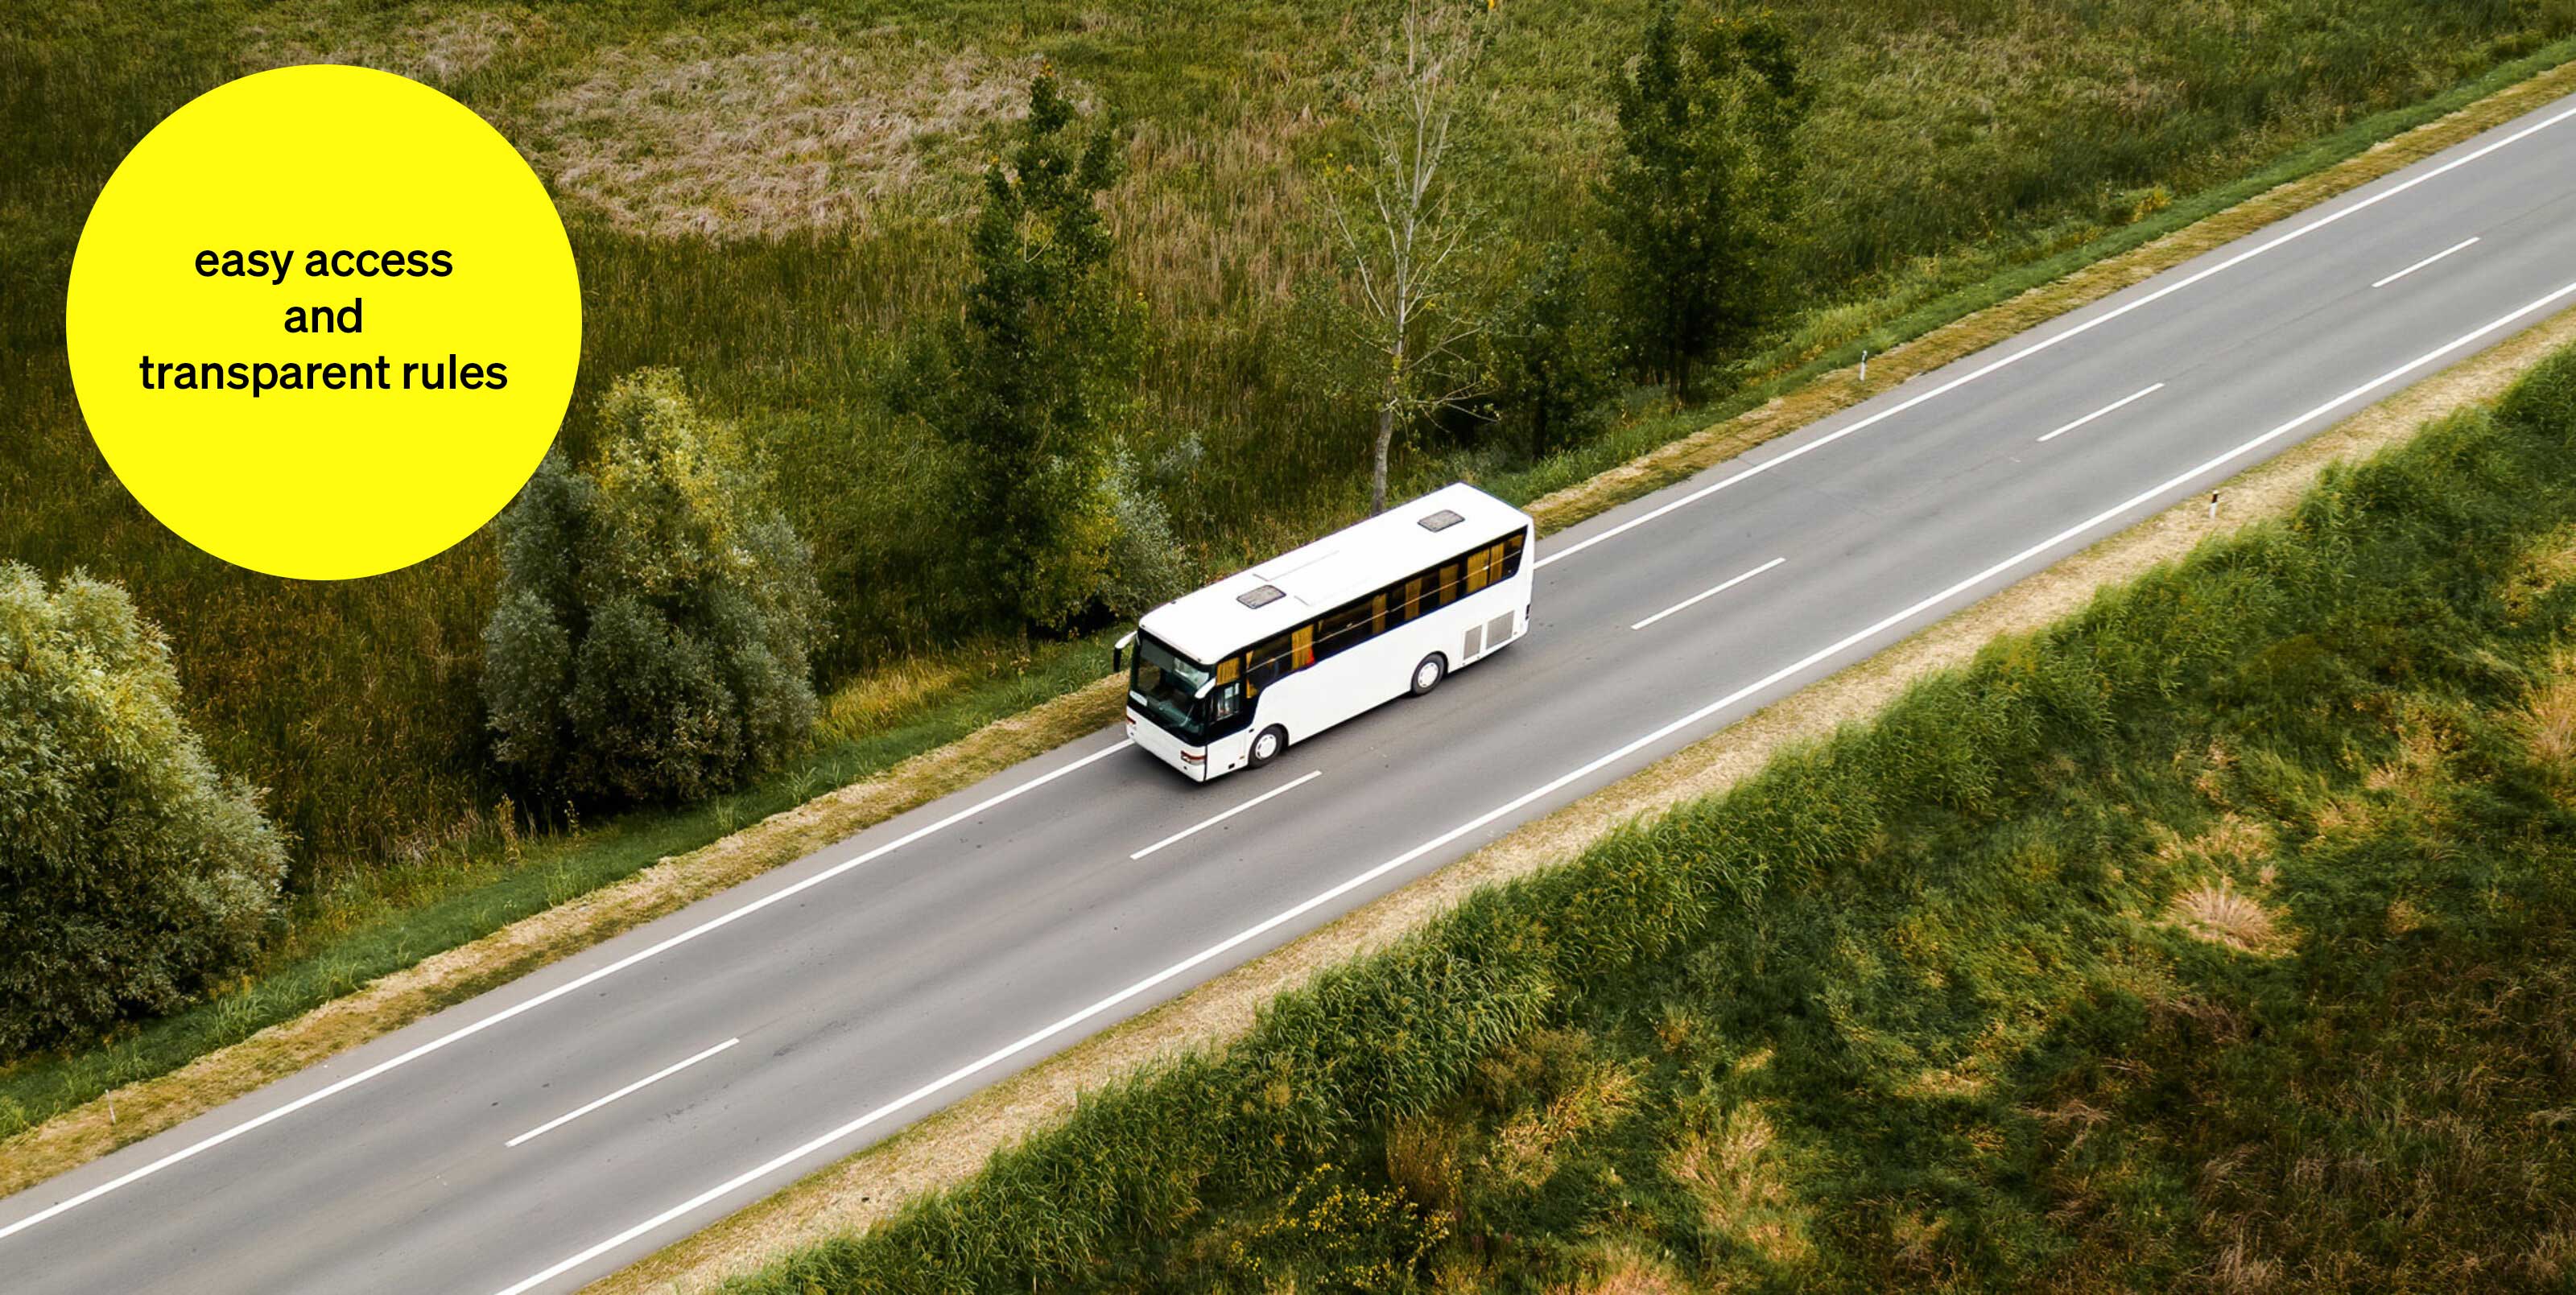 White bus driving on an open road through green landscape - text module in round tile: easy access and transparent rules